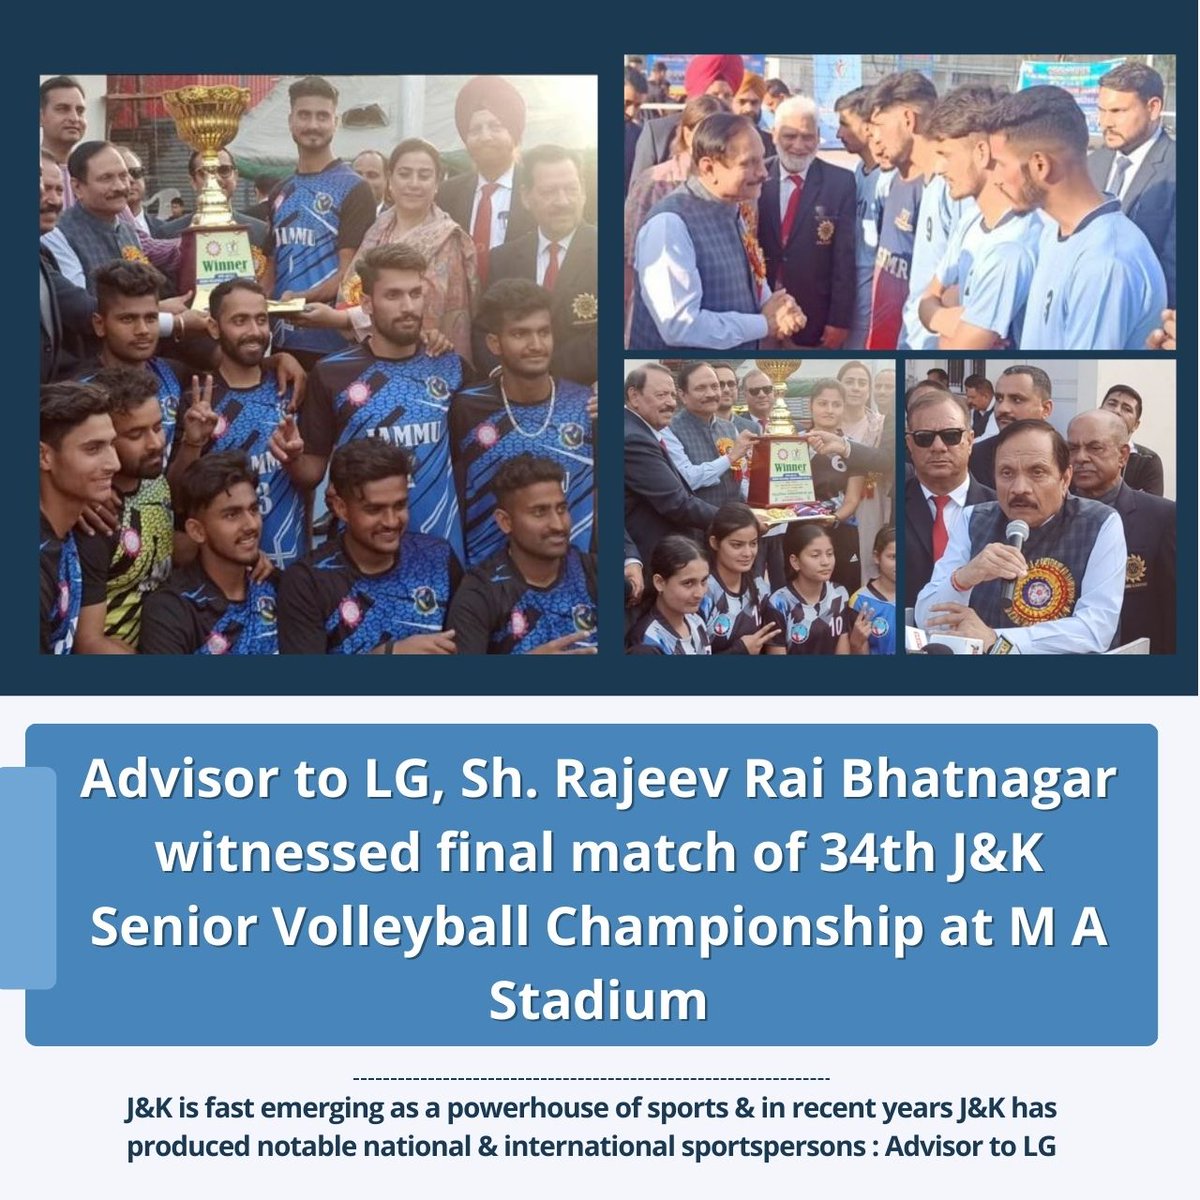 Advisor to LG, Sh. Rajeev Rai Bhatnagar witnessed final match of 34th J&K Senior Volleyball Championship at M A Stadium; says J&K is fast emerging as a powerhouse of sports & in recent years J&K has produced notable national & international sportspersons. @PMOIndia @IndiaSports